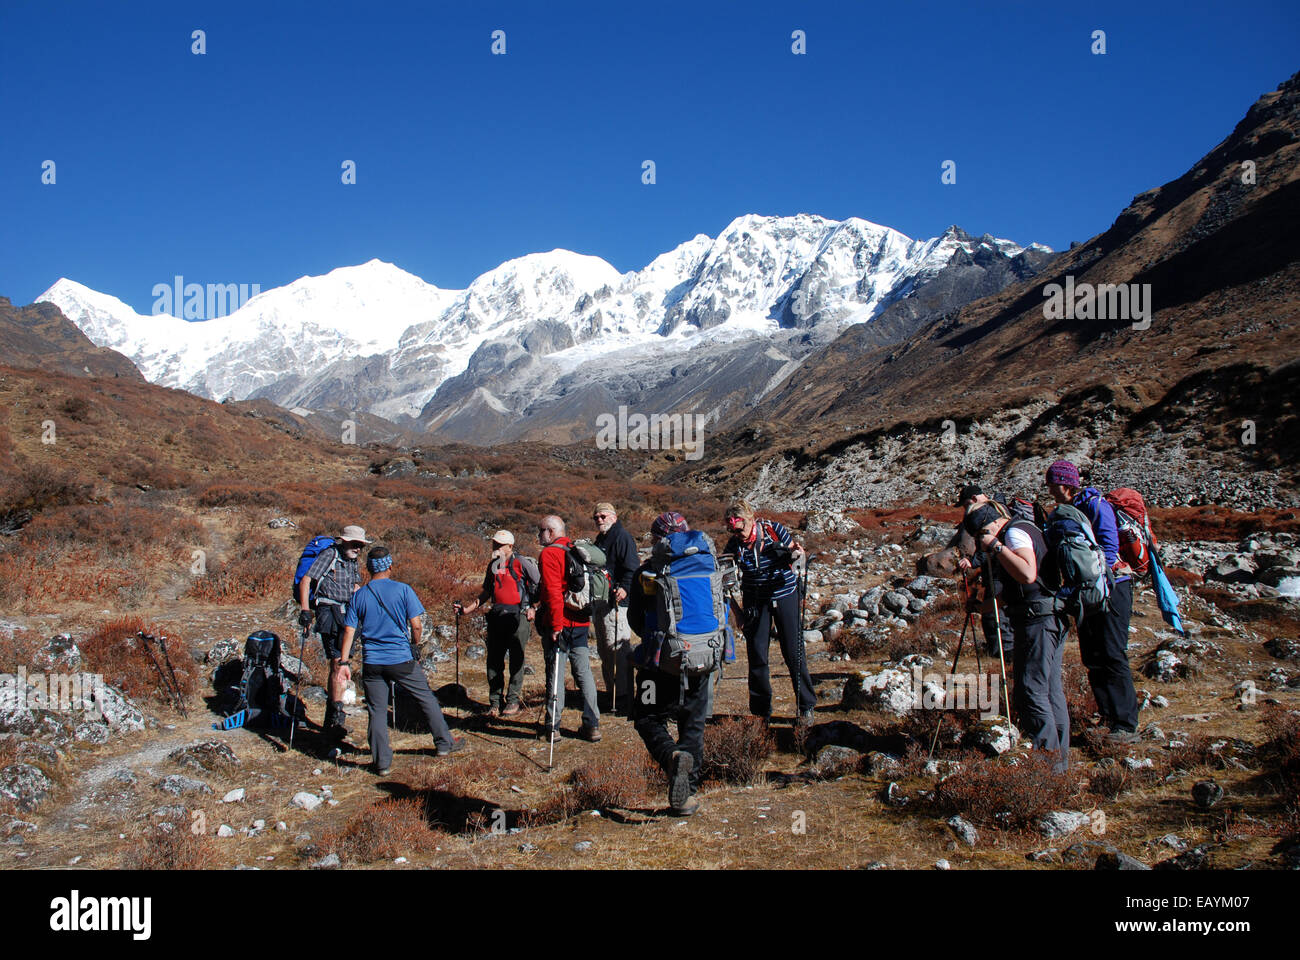 A group of trekkers in the high mountains of the Indian Himalaya close to Kangchenjunga Stock Photo